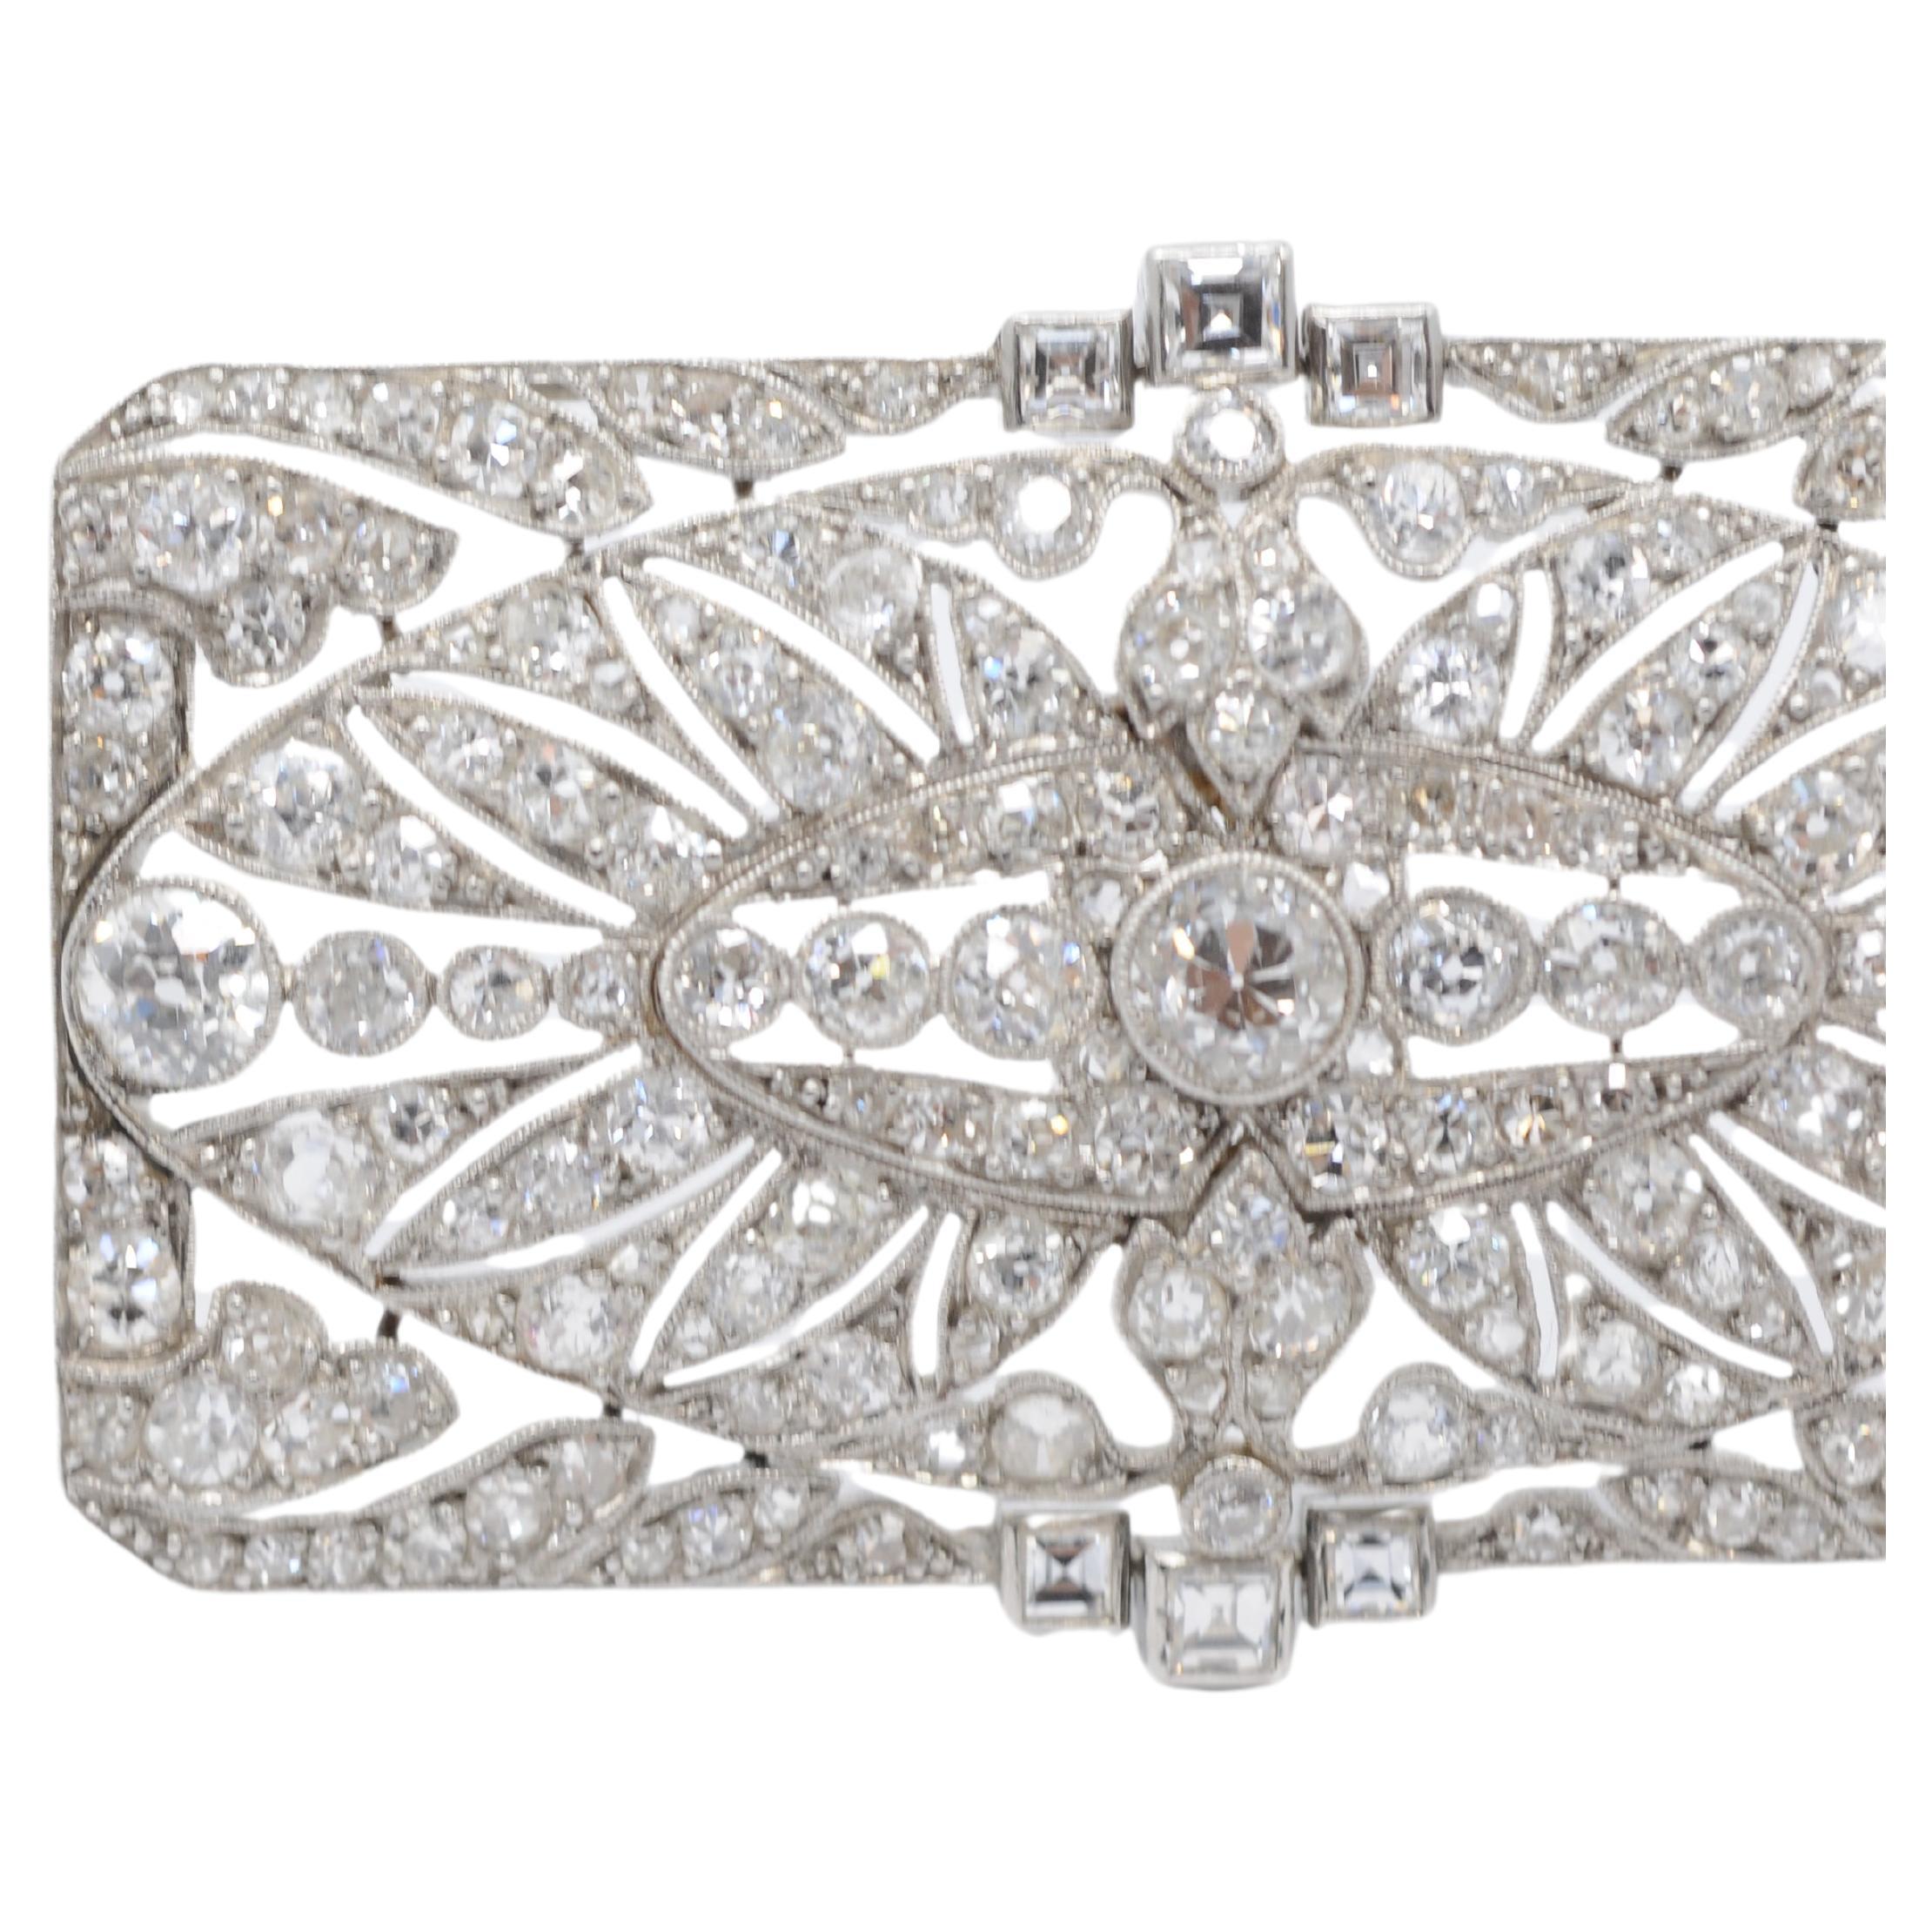 Art deco brooch with 170 diamonds in Old European cut noble platinum  For Sale 8